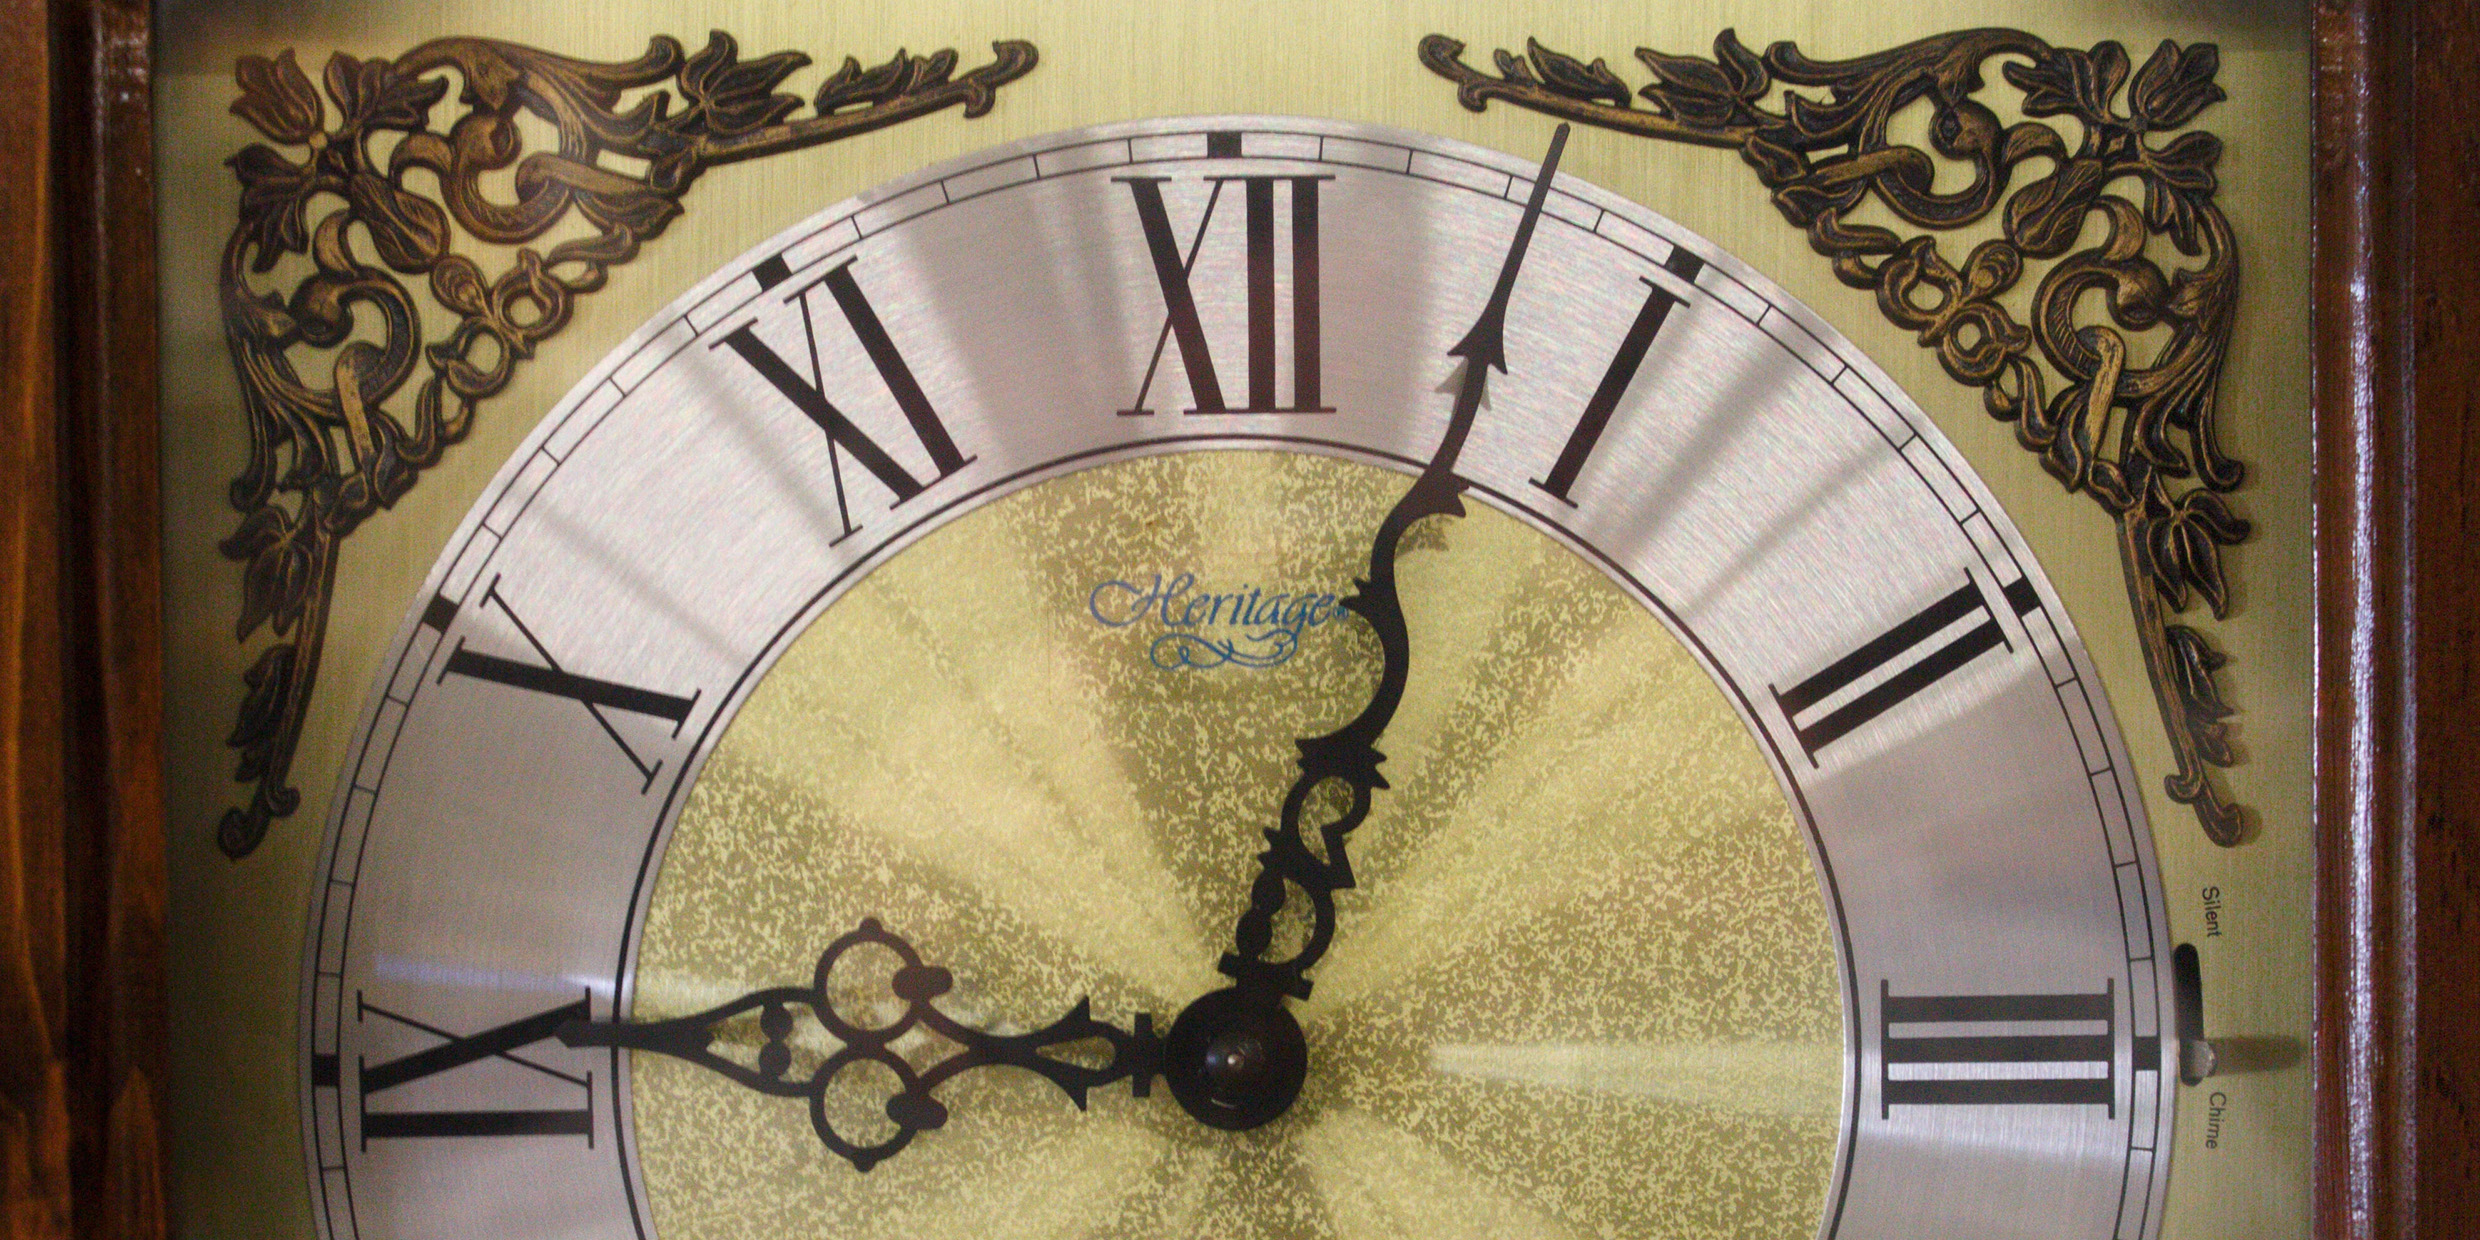 Close up image of the face of a grandfather clock